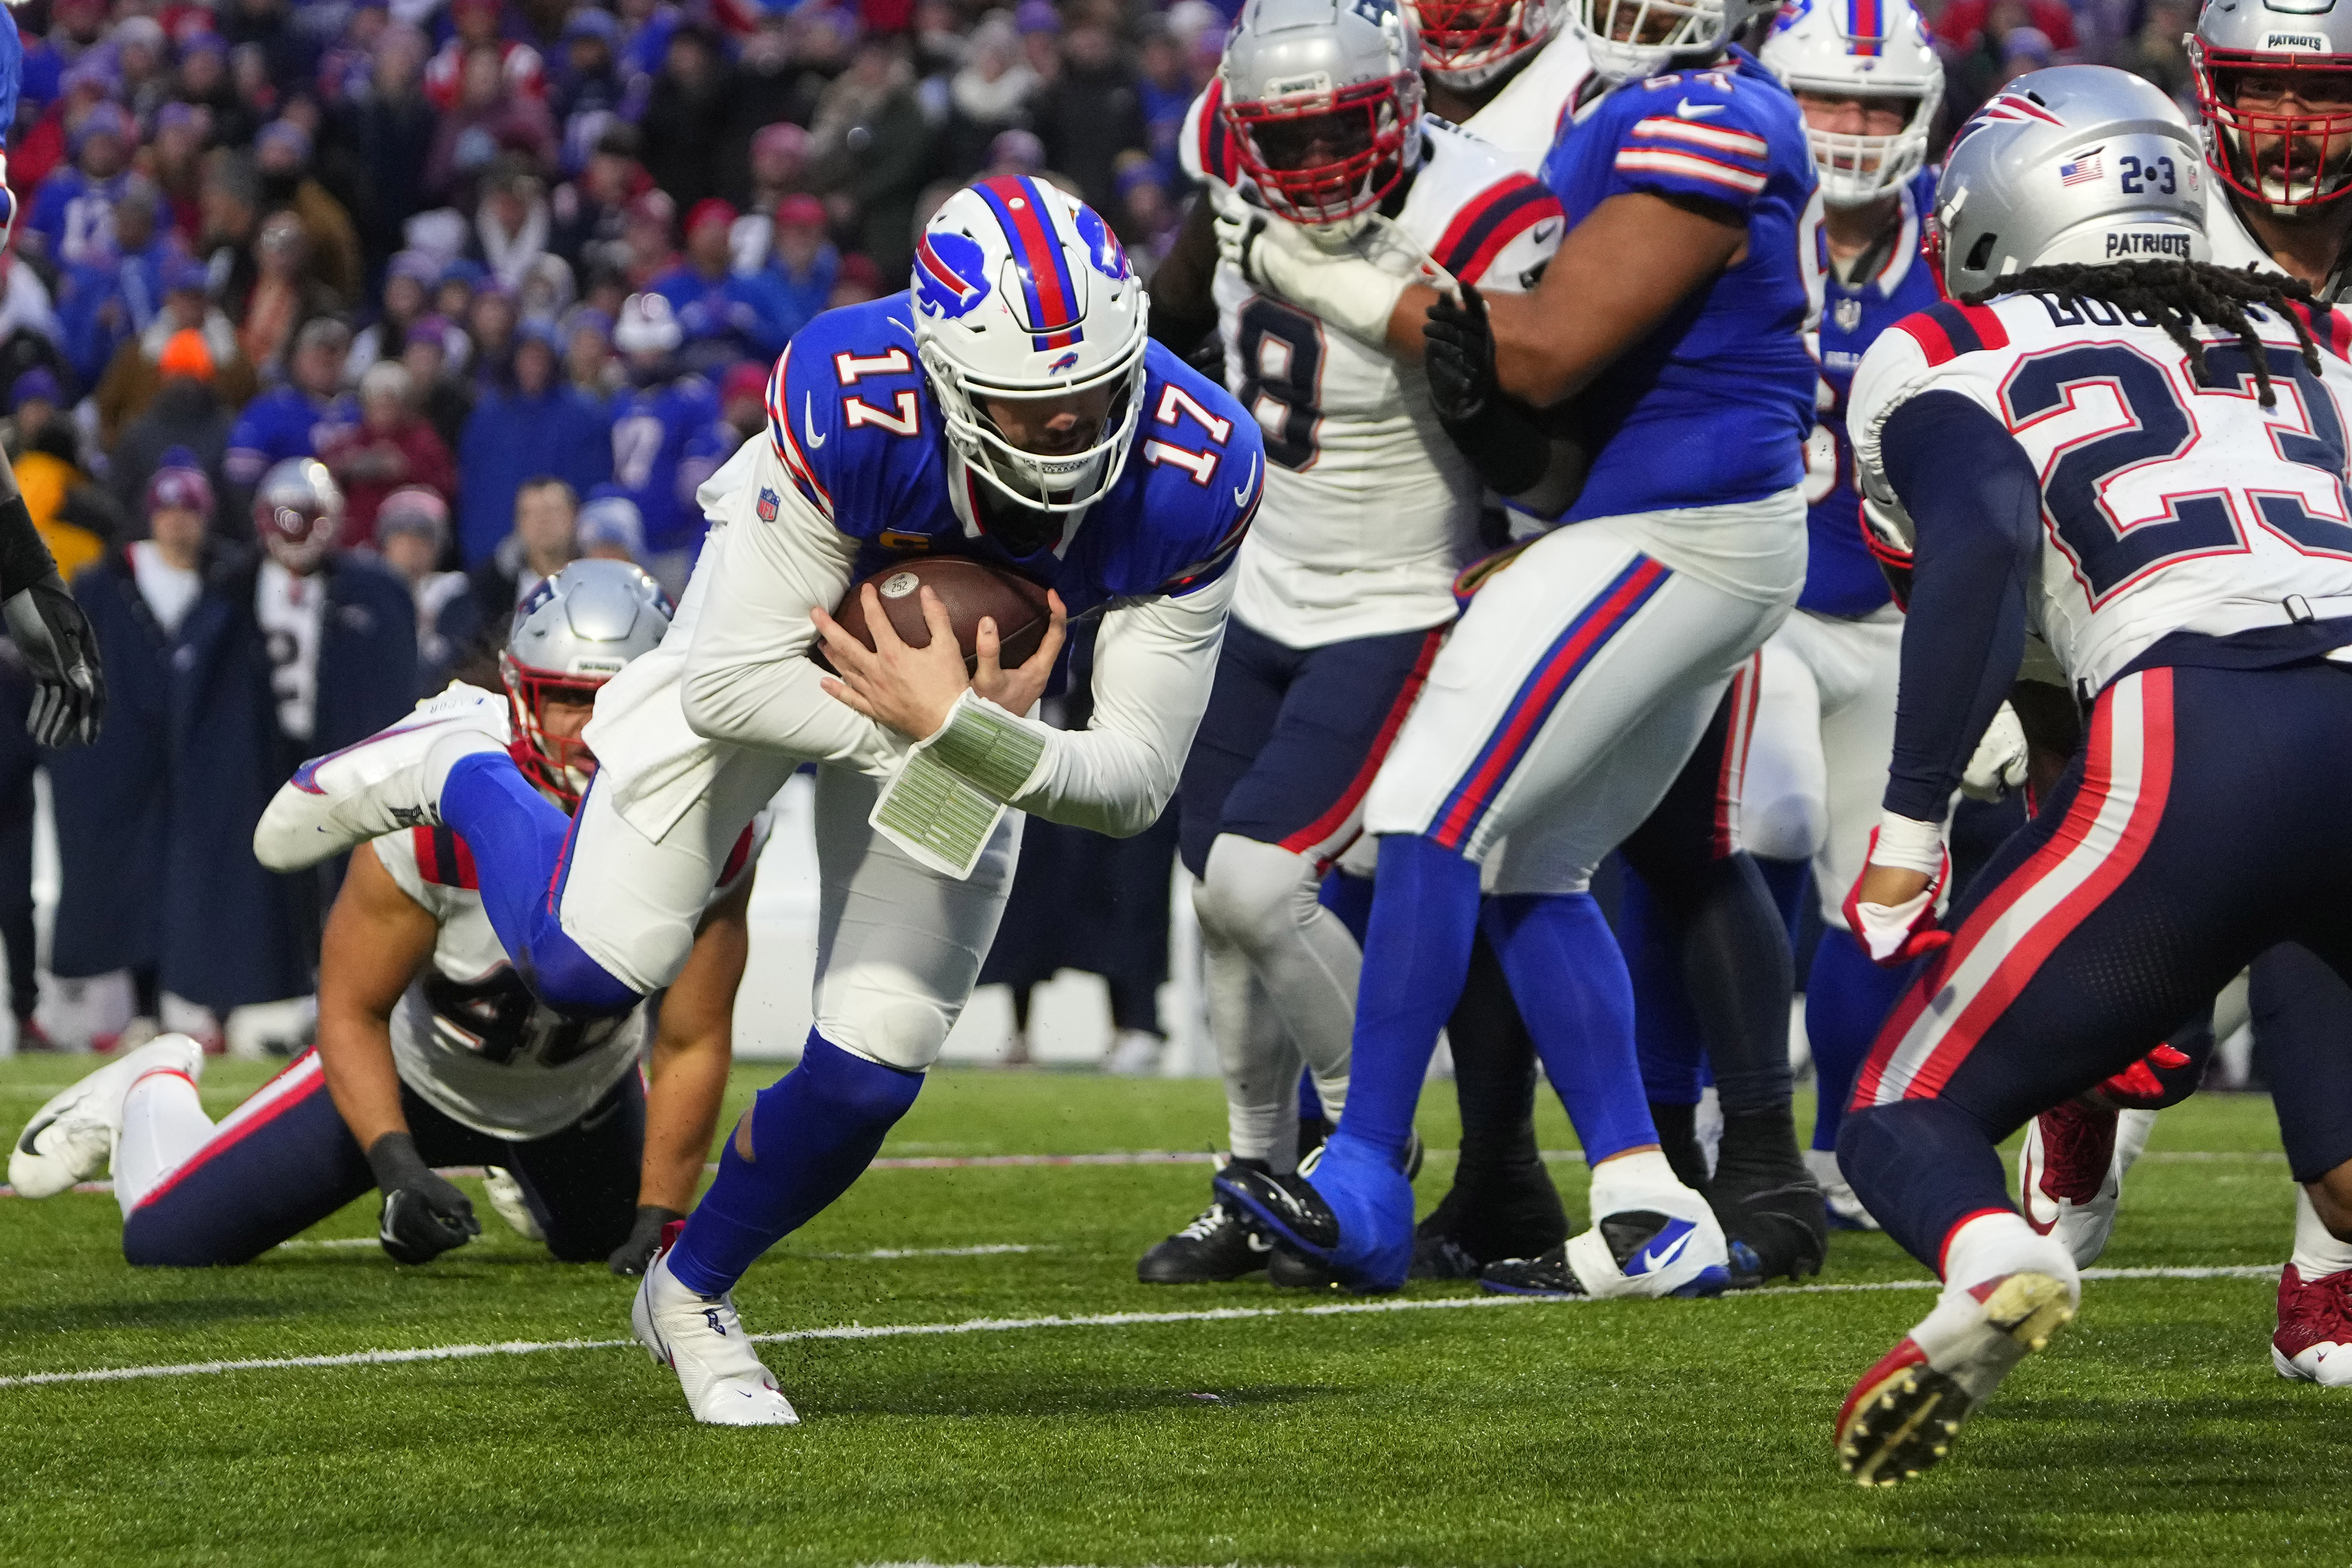 Josh Allen ran for two touchdowns in the Bills' 27-21 win over the New England Patriots on Sunday.